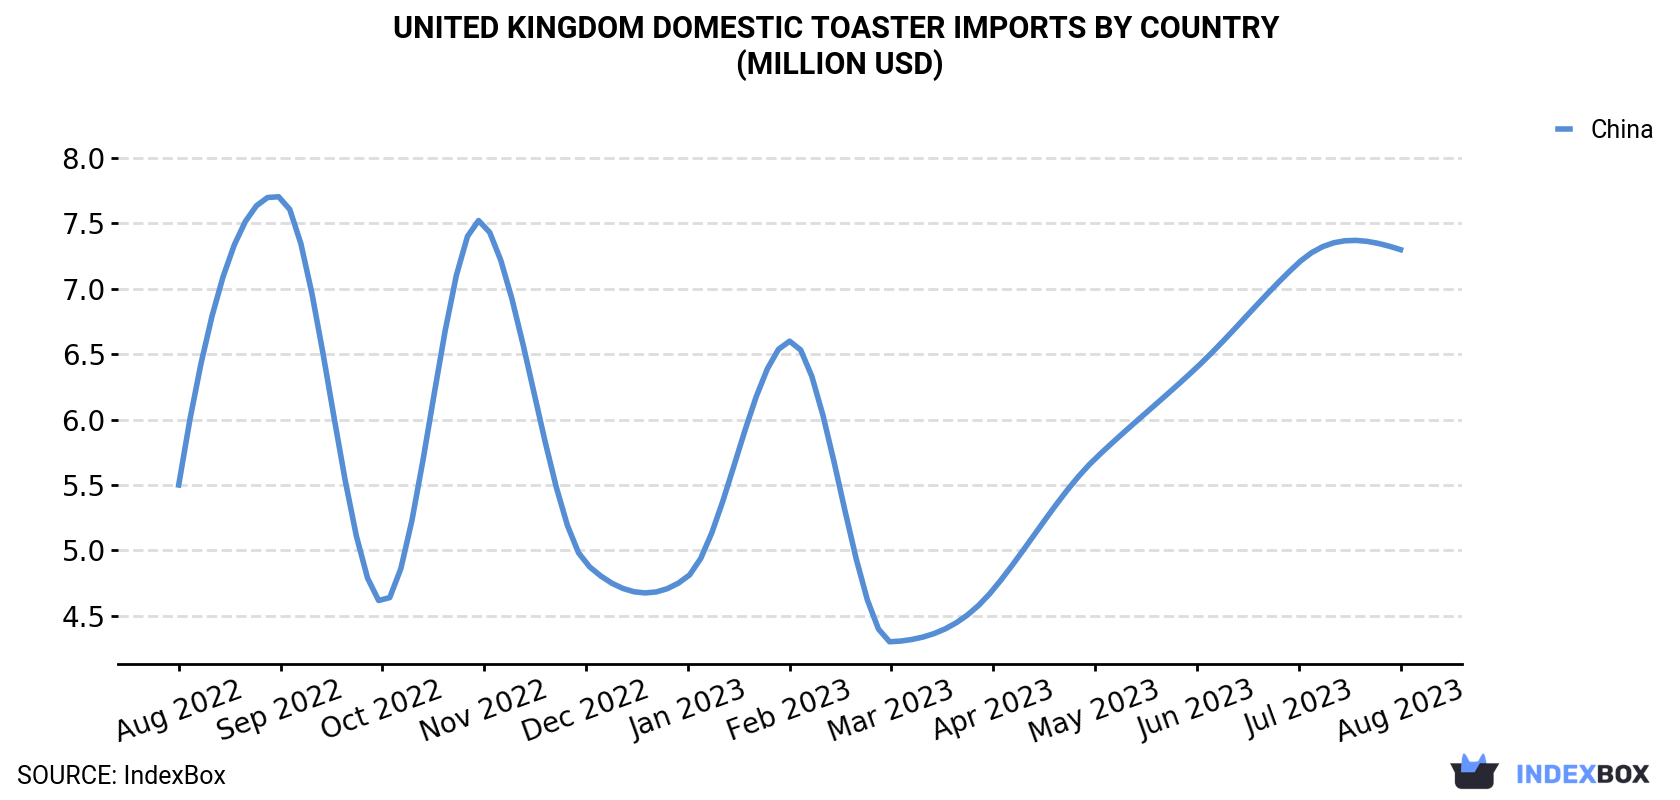 United Kingdom Domestic Toaster Imports By Country (Million USD)